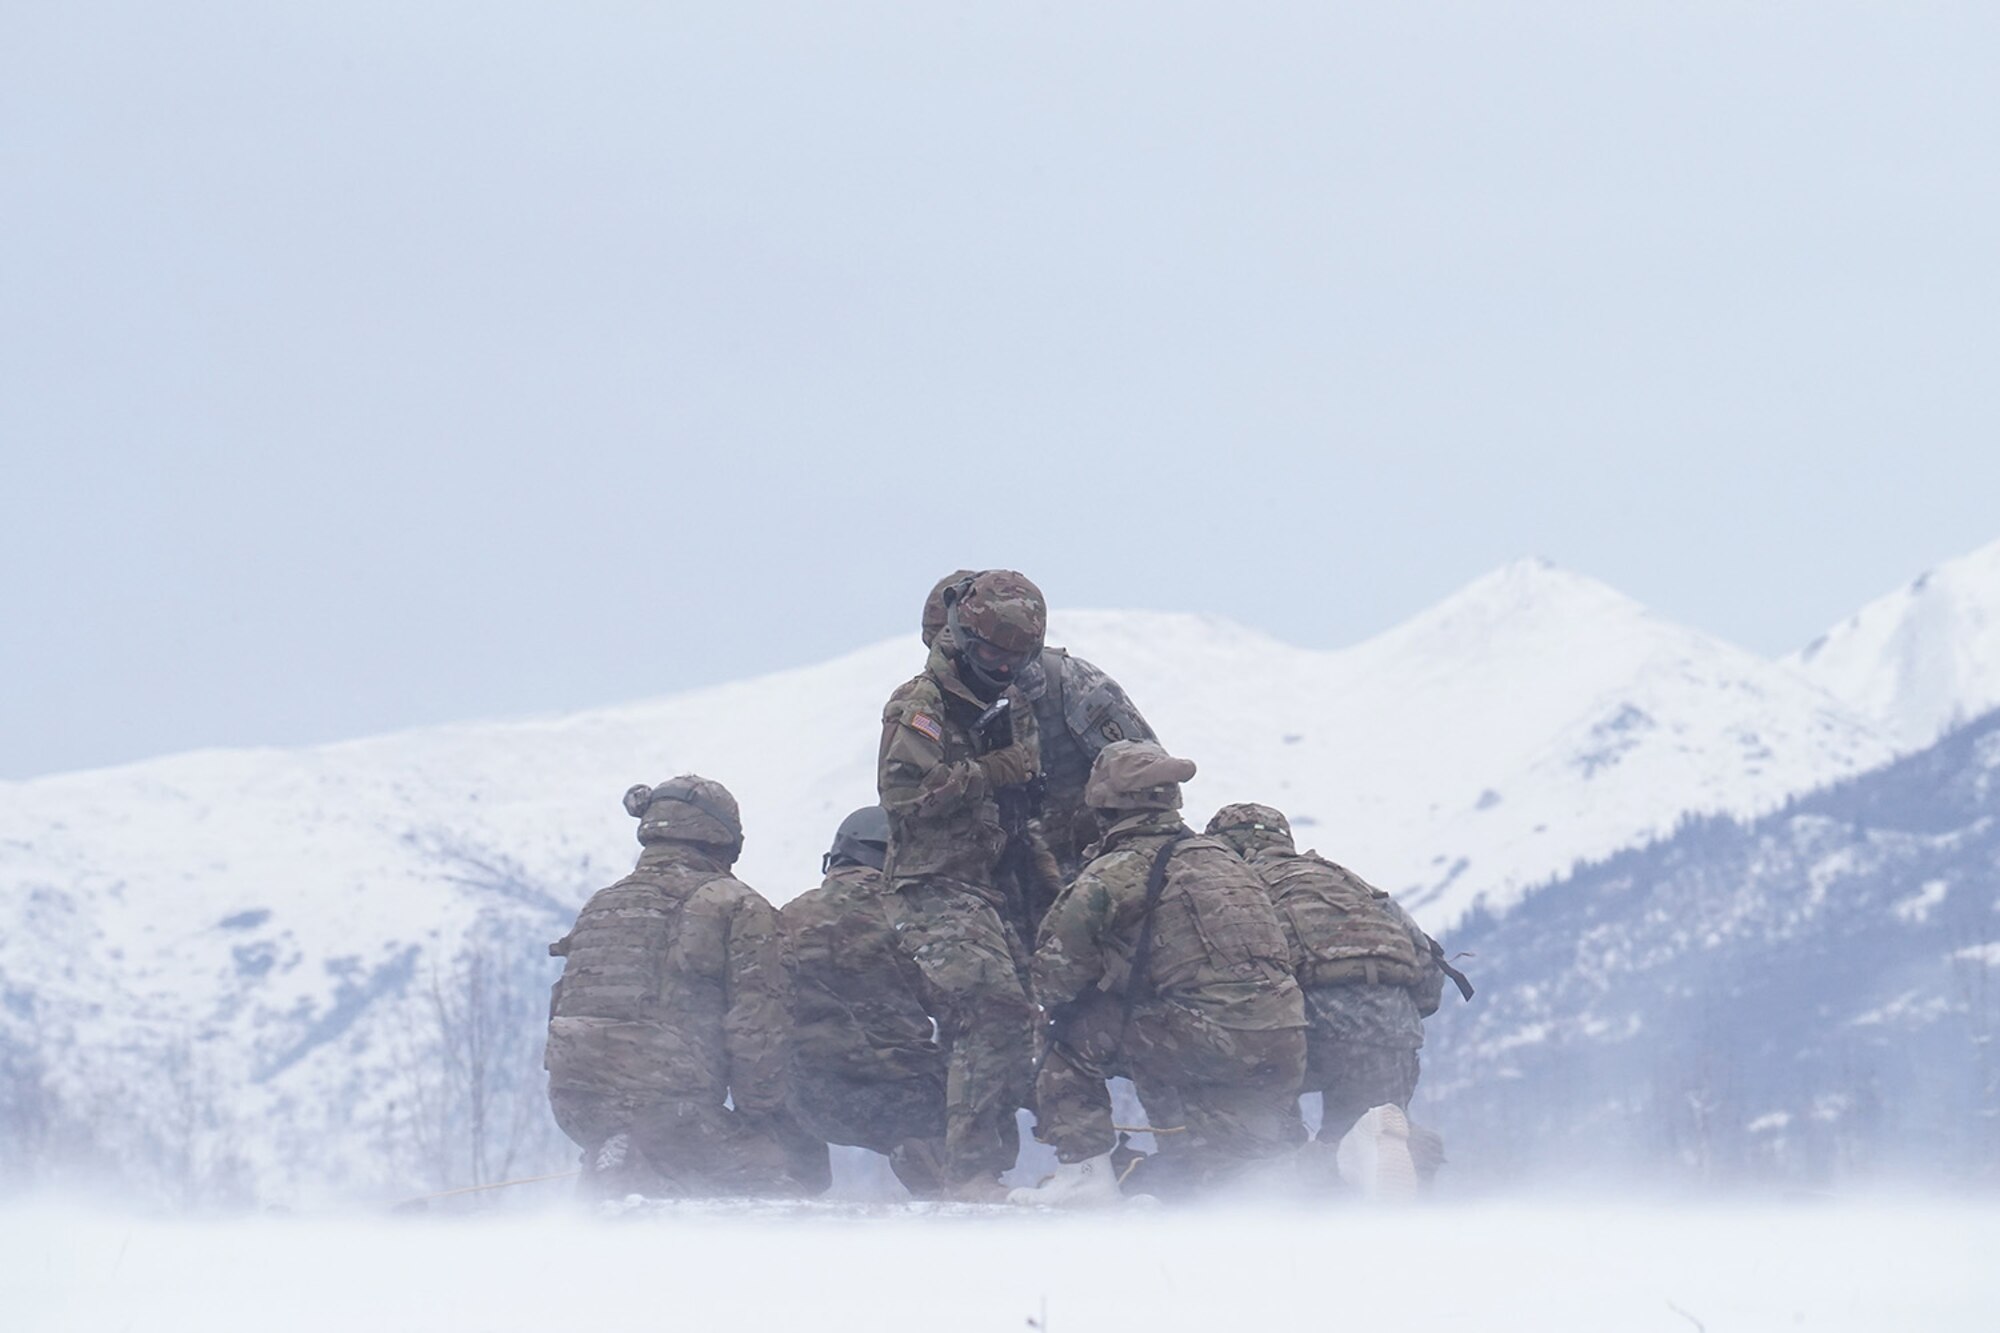 Medics from the 6th Brigade Engineer Battalion (Airborne), 4th Infantry Brigade Combat Team (Airborne), 25th Infantry Division, U.S. Army Alaska, train with aviators from the Alaska Army National Guard at Neibhur Drop Zone, Nov. 26, 2019, to hone their life-saving and Medevac hoist skills for the paratroopers’ upcoming rotation to the Joint Readiness Training Center at Fort Polk, La.